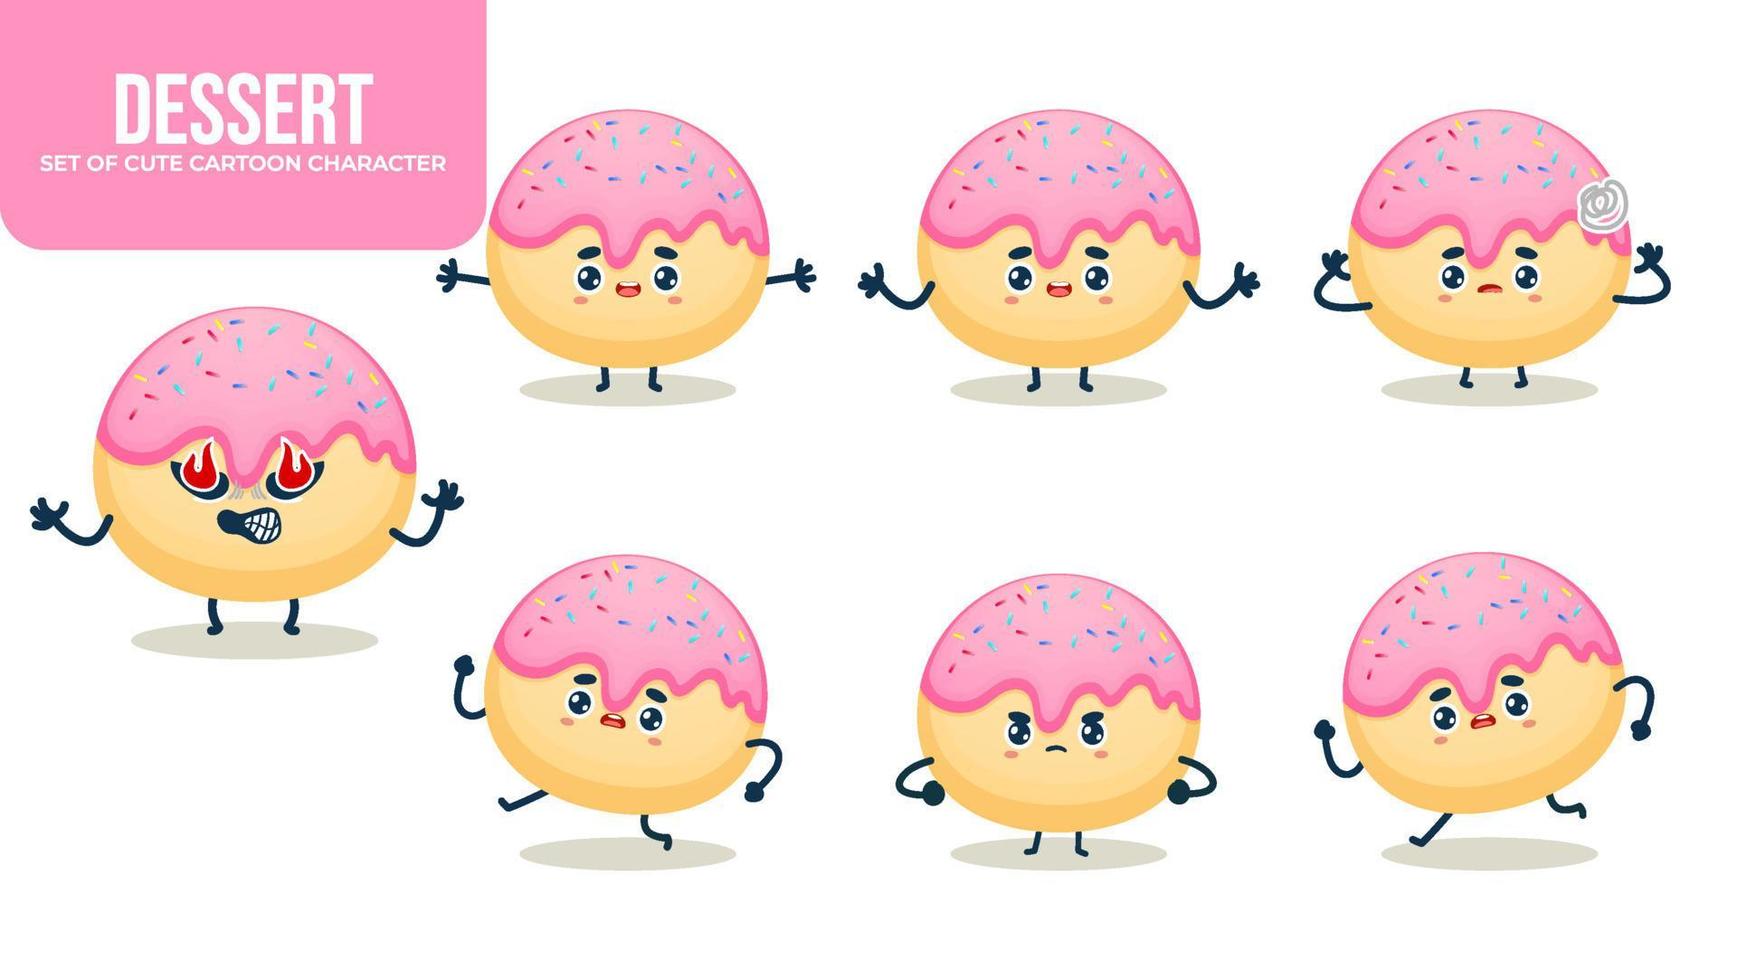 Set of cute sweet dessert cartoon character with different poses Premium Vector